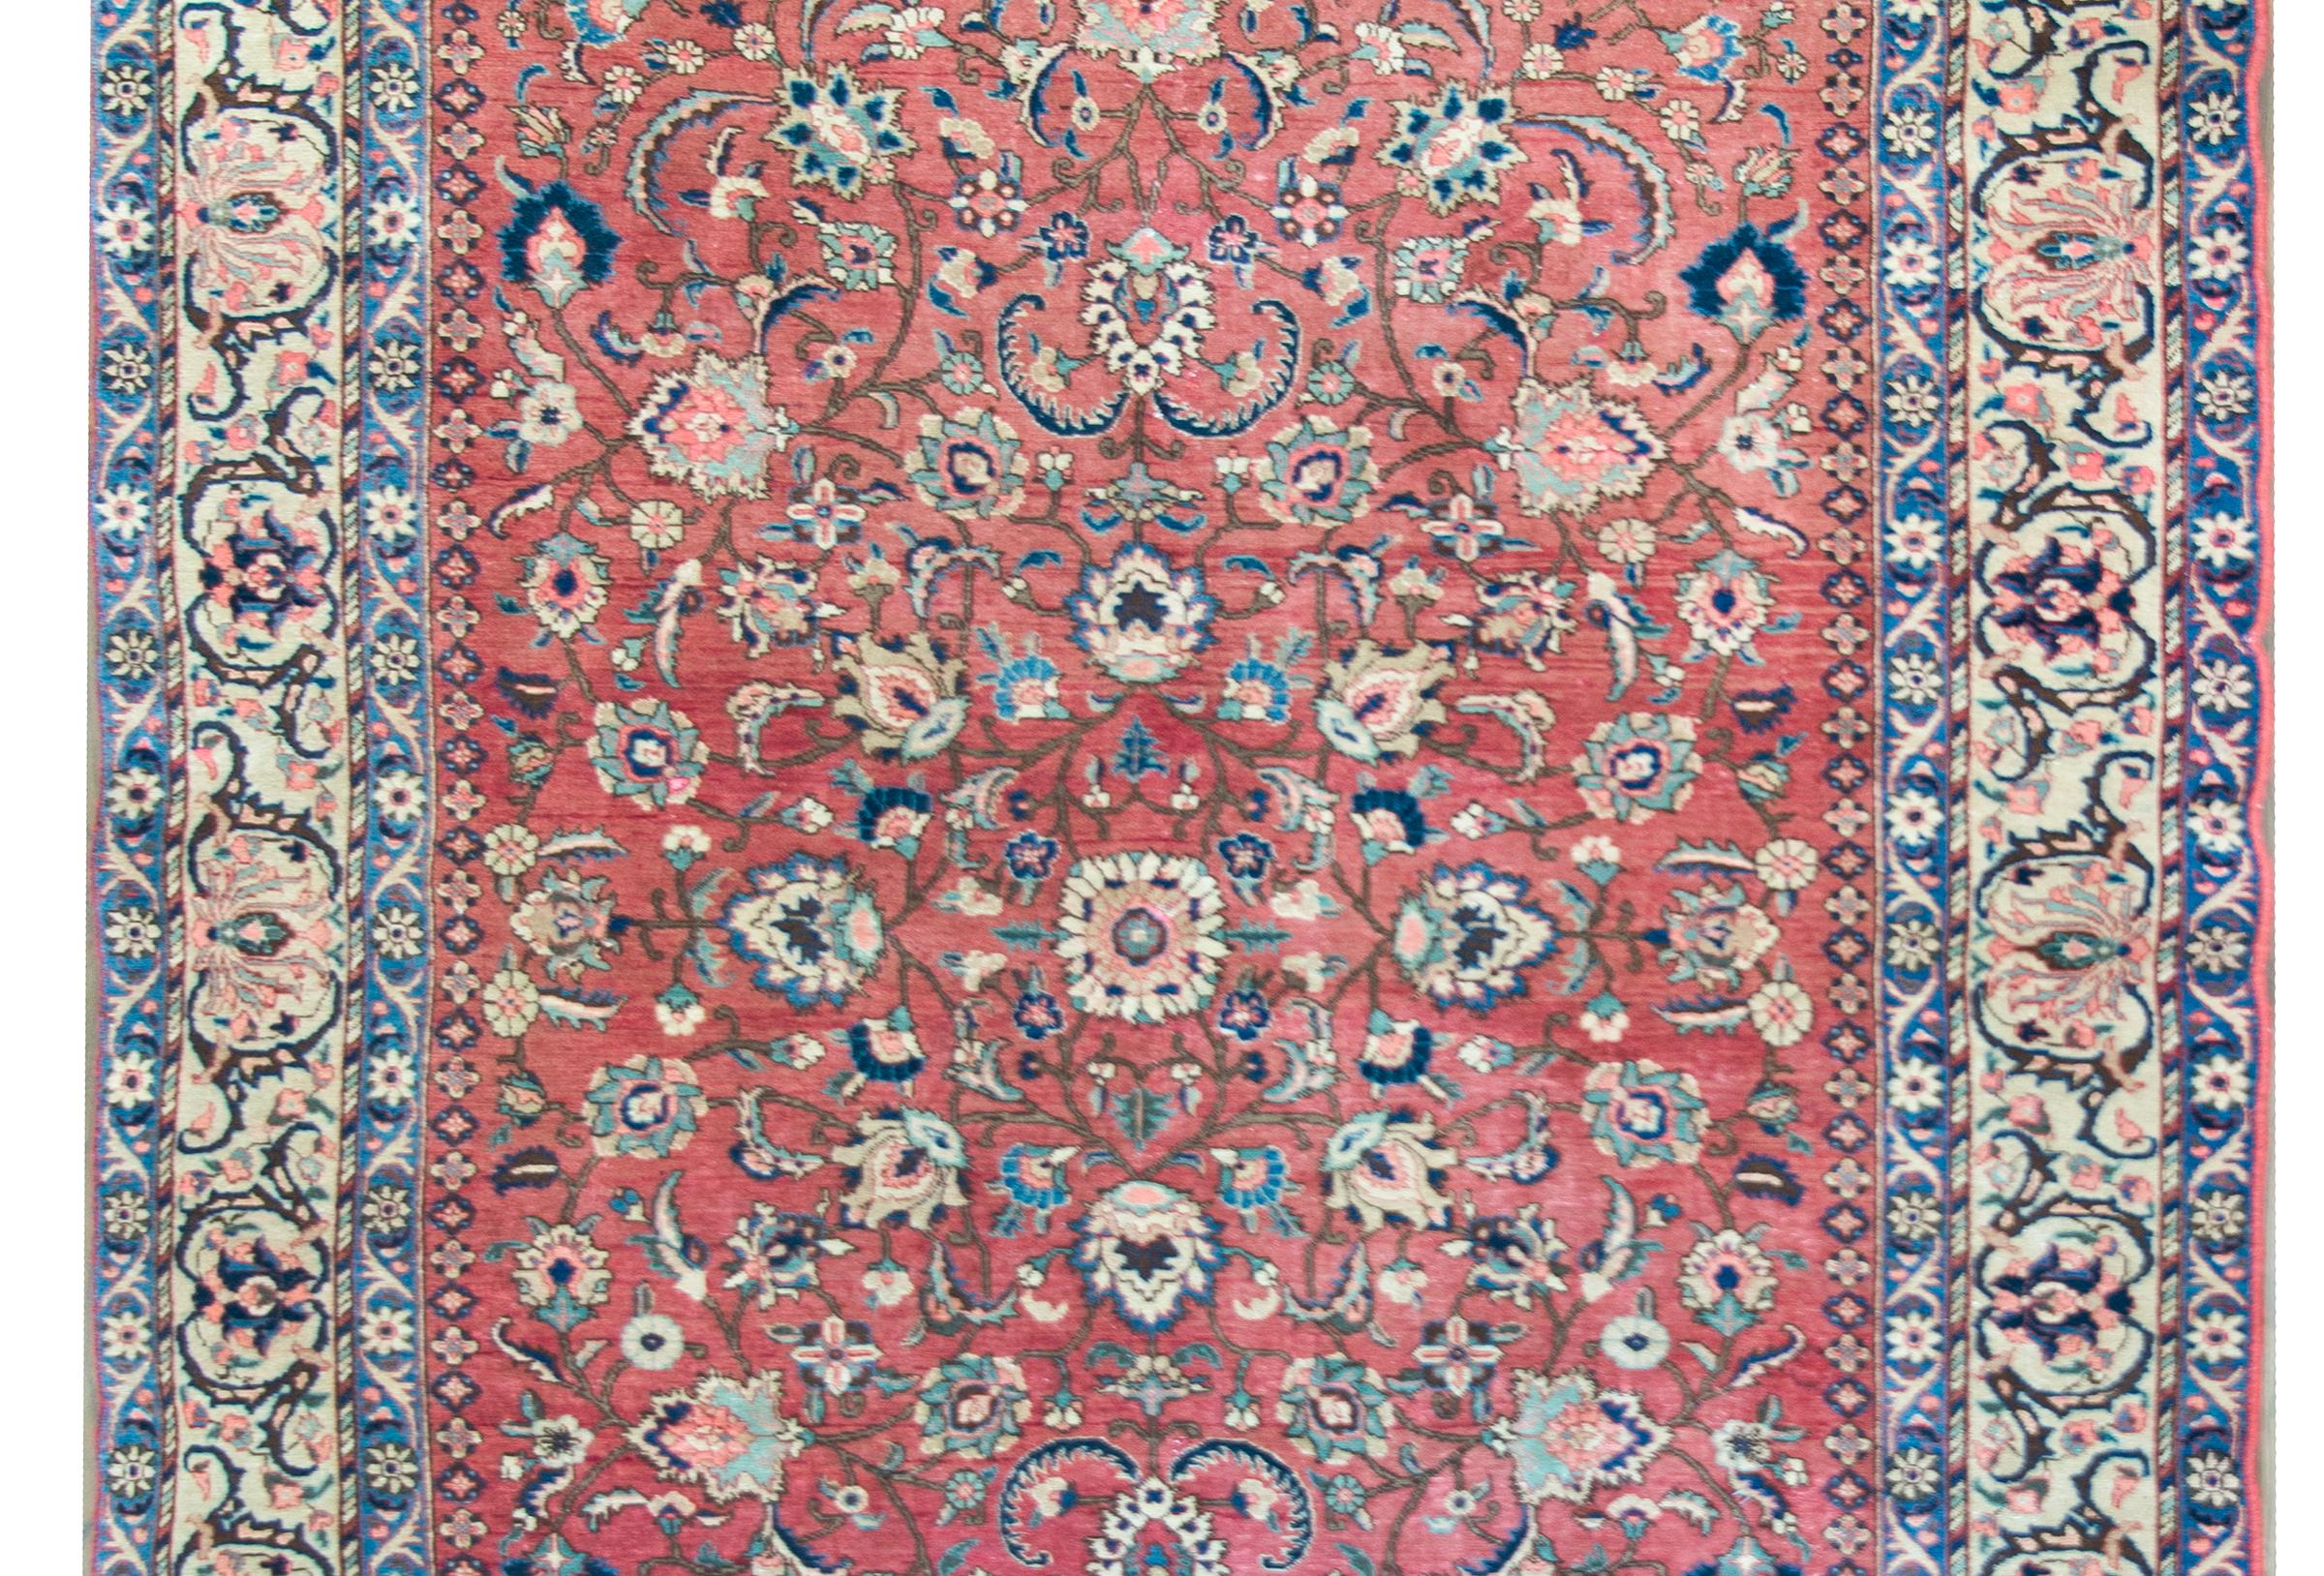 A gorgeous early 20th century Persian Khoy rug with an elaborate all-over mirrored floral pattern with a central flower surrounded by intricate scrolling vines and more flowers, surrounded by a complex border with a wide central floral stripe